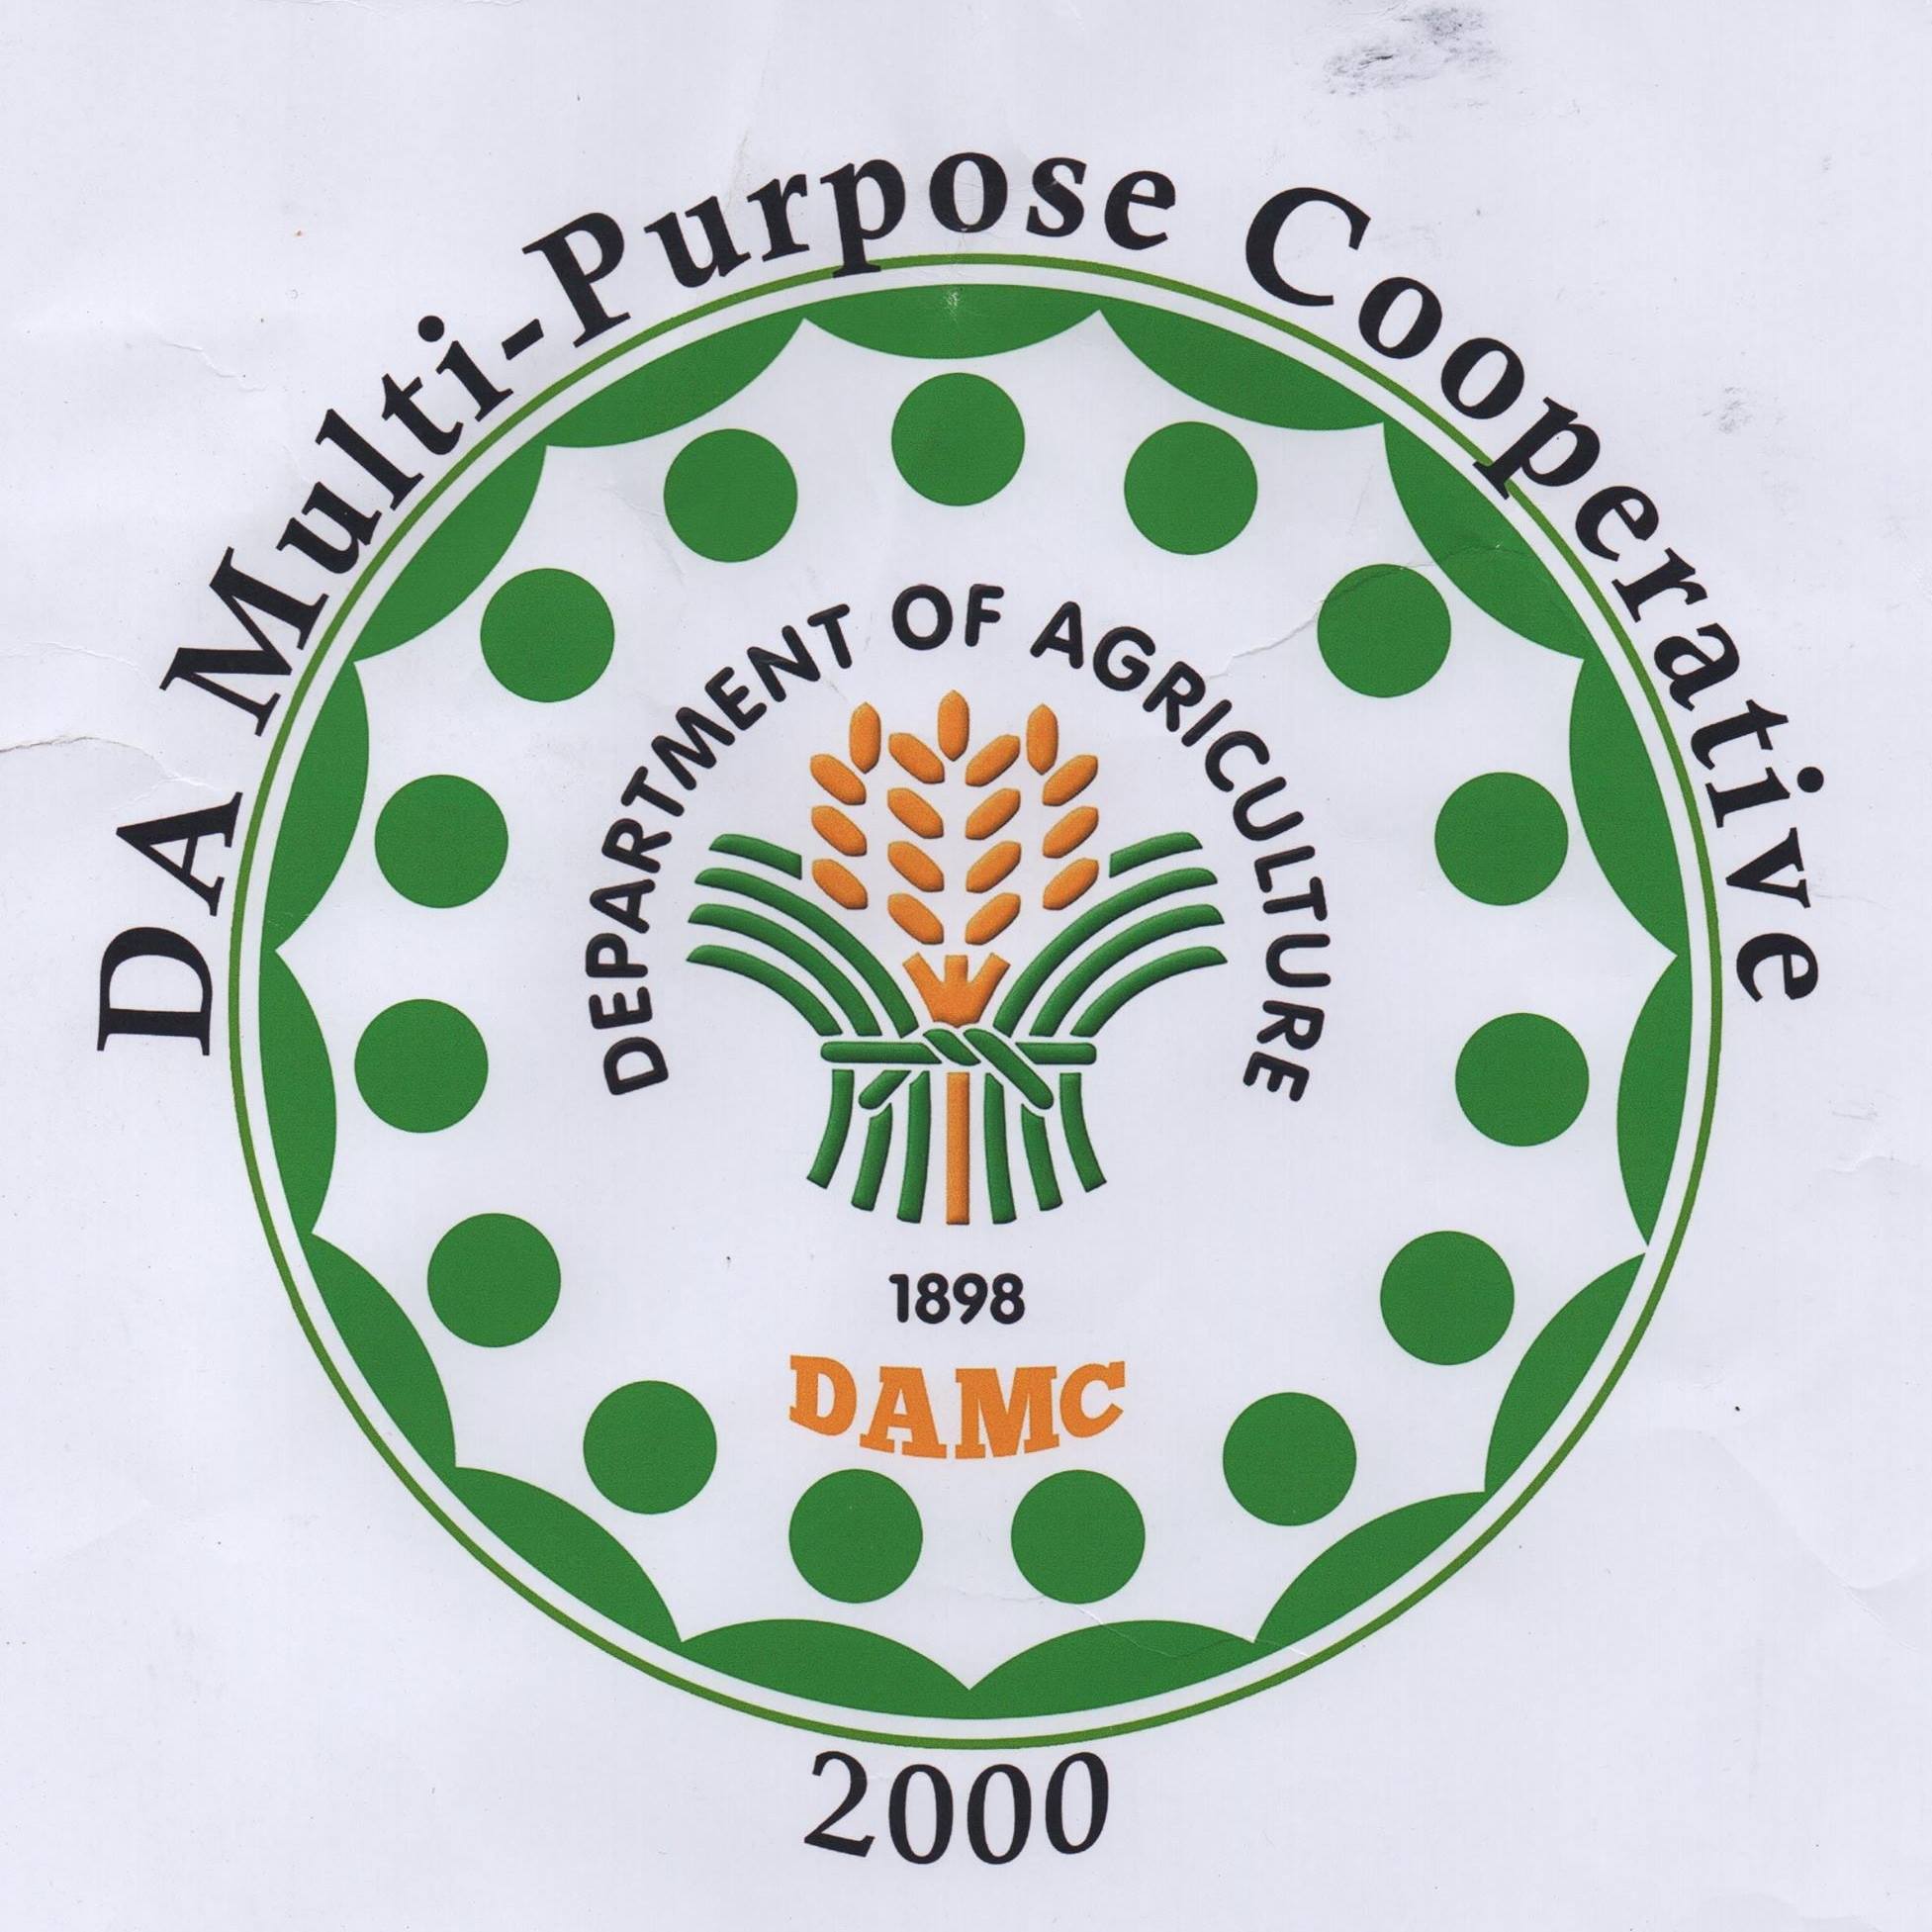 DEPT OF AGRICULTURE EMPLOYEES MULTI-PURPOSE COOP LOGO